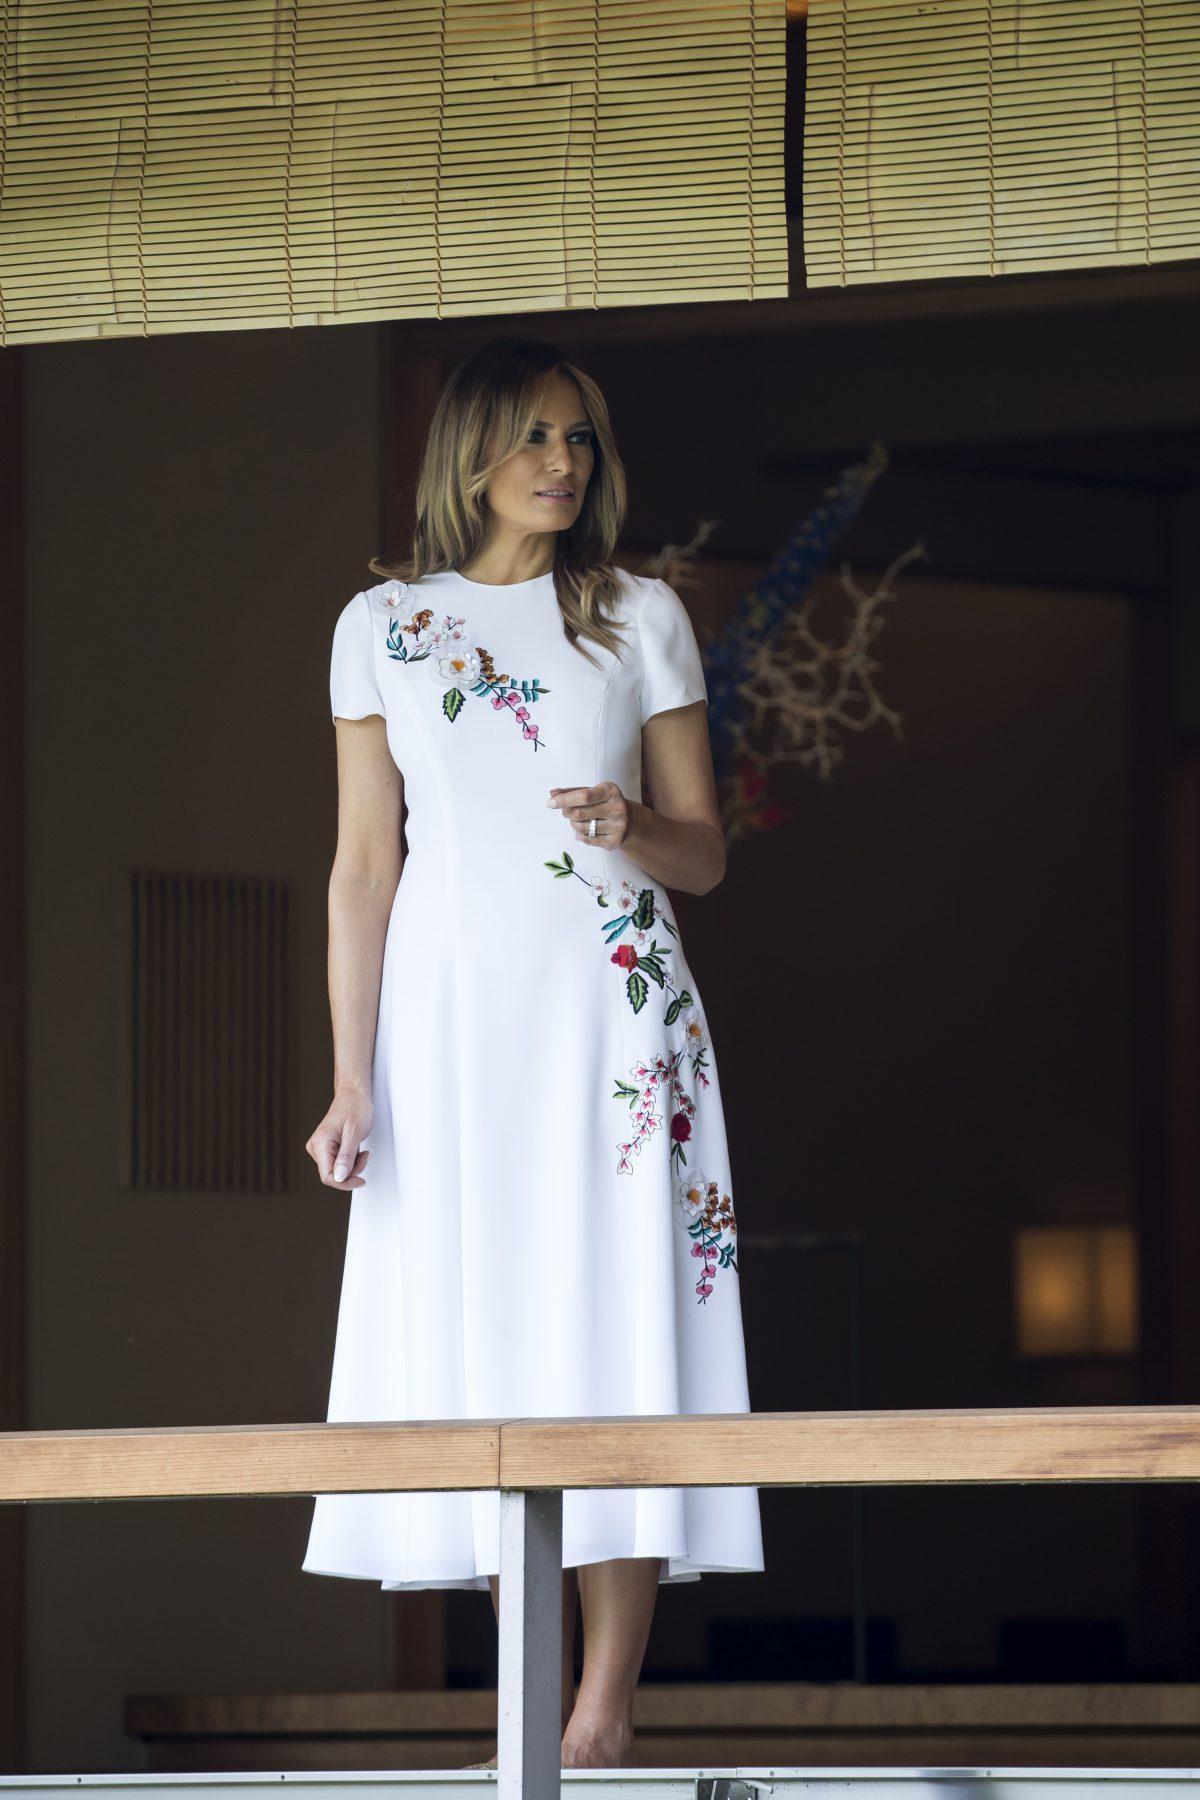 First Lady Melania Trump visiting a pond at the Japanese style annex inside the State Guest House to look at koi carps in Tokyo, Japan, on May 27, 2019. (Tomohiro Ohsumi/Getty Images)